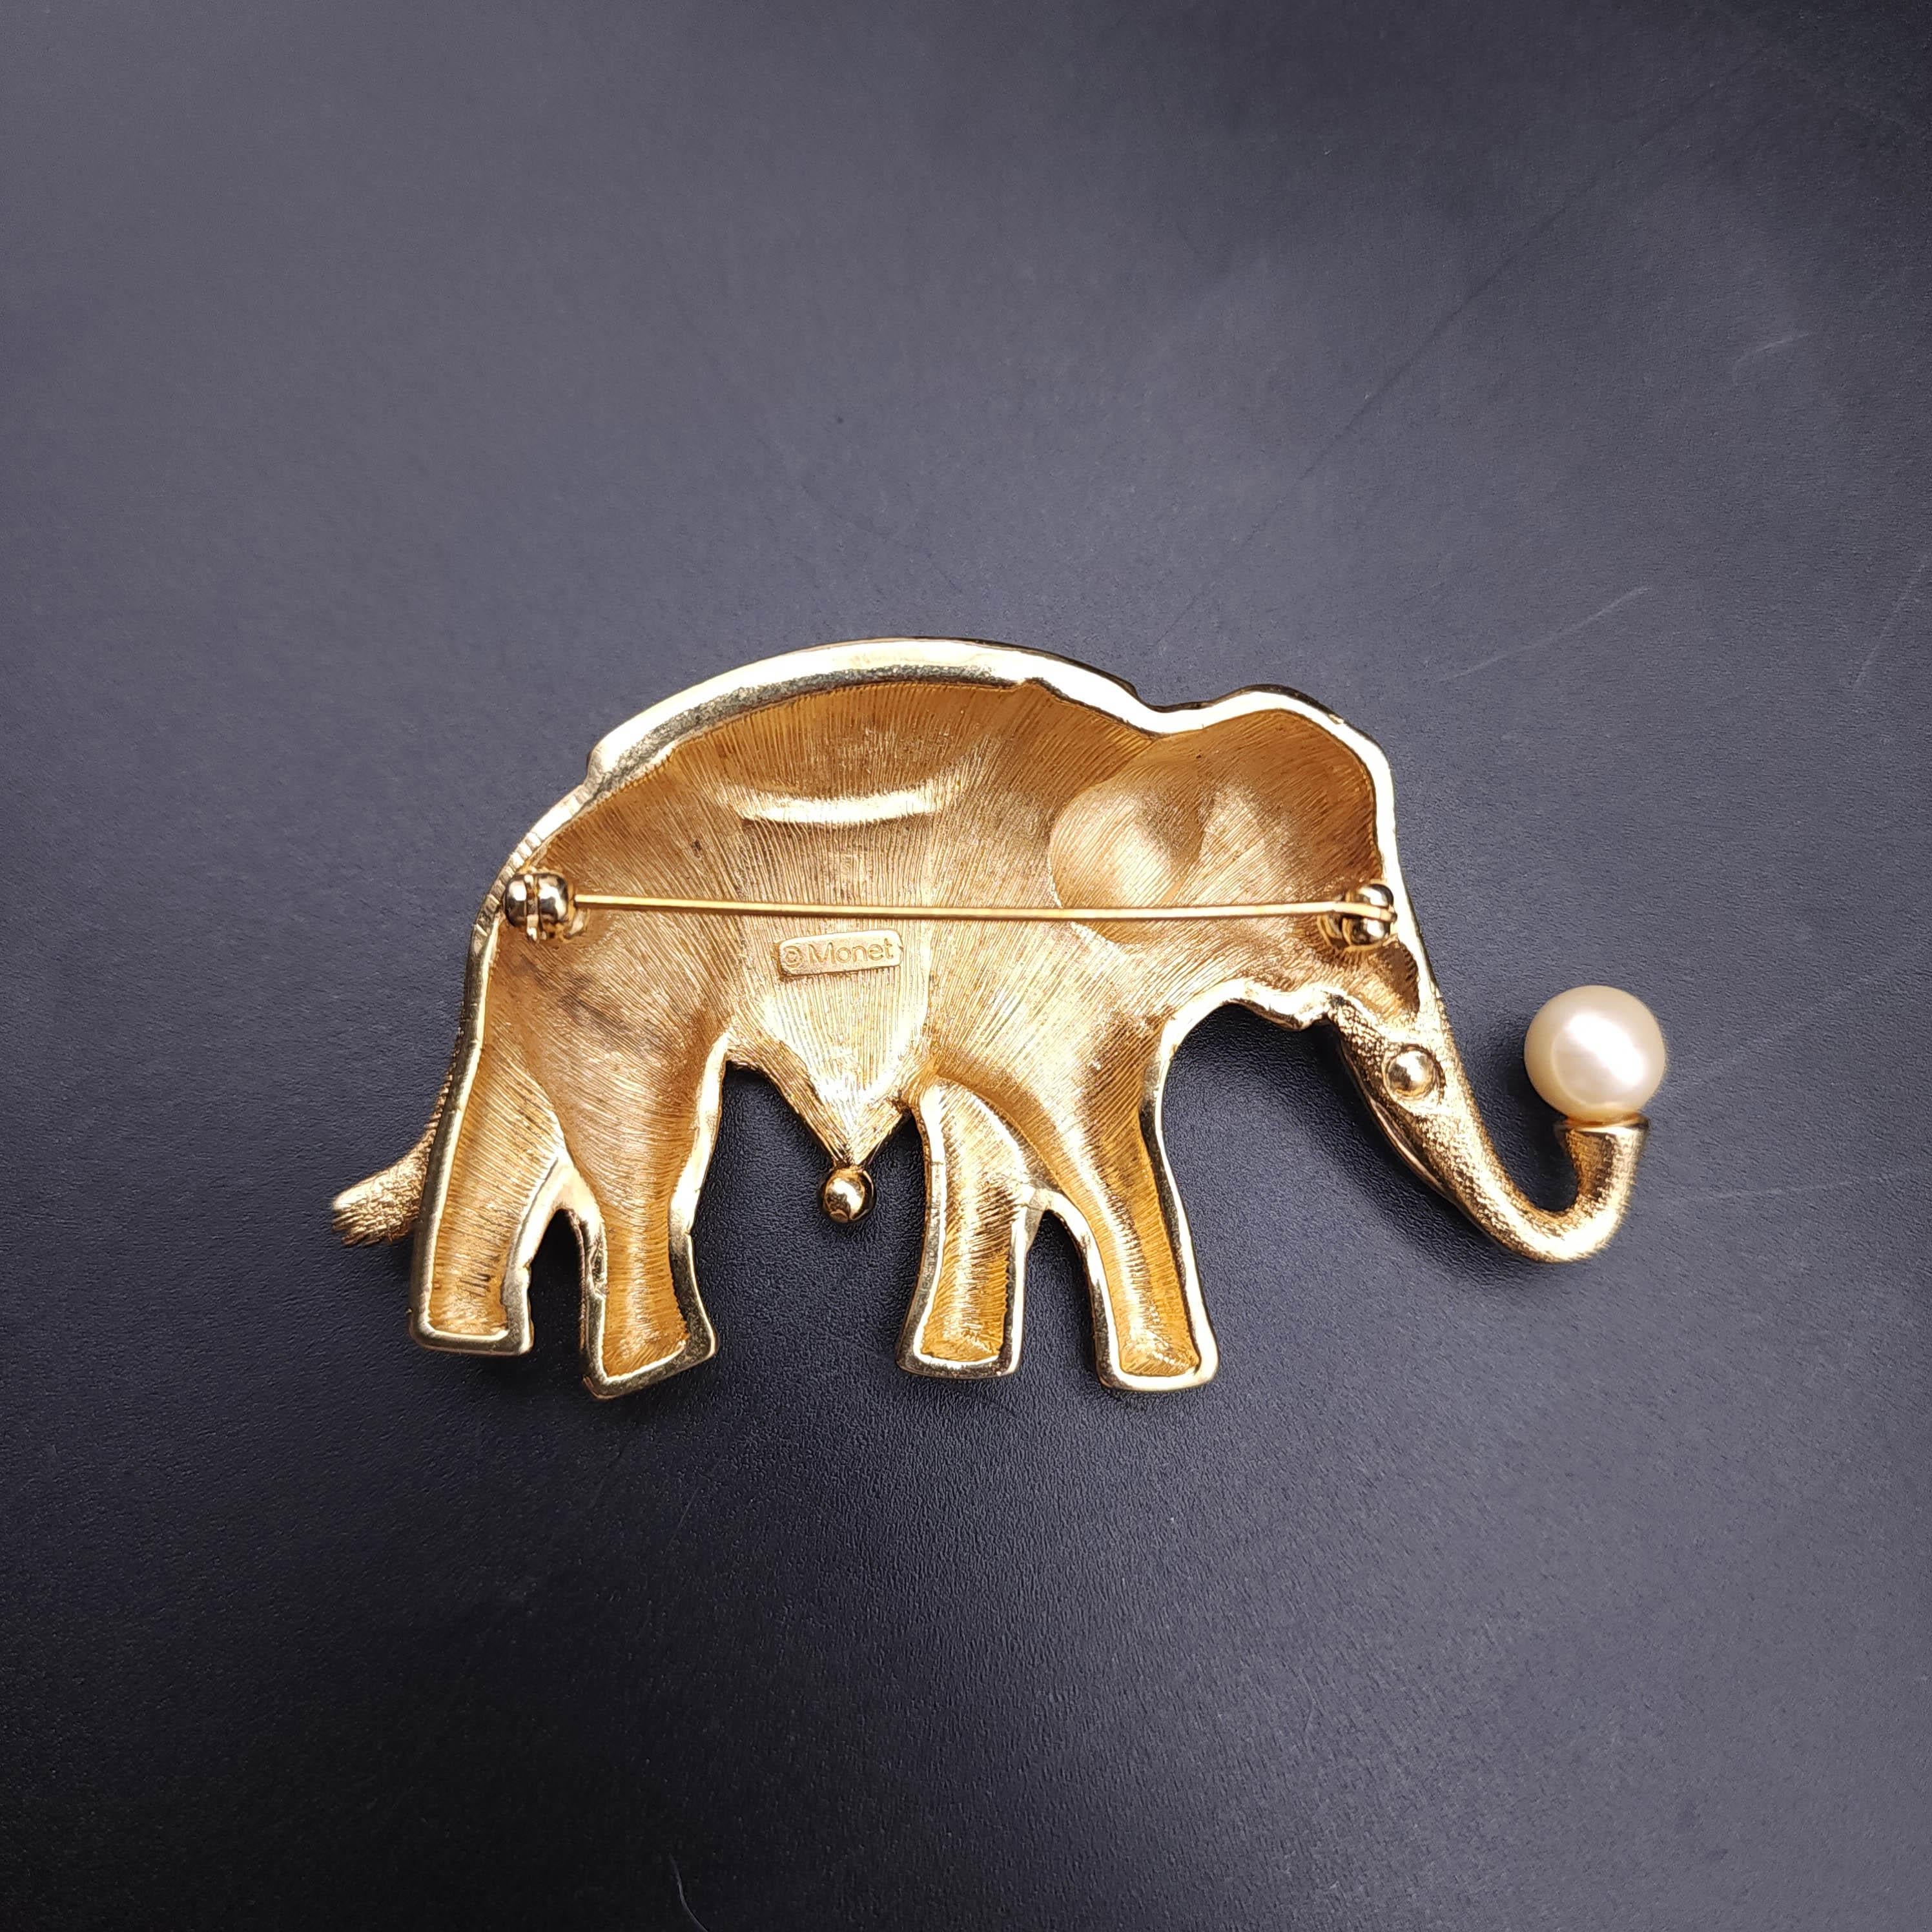 Monet Elephant Brooch with Faux Pearl and Enamel Accents, Vintage, Gold Filled In Excellent Condition For Sale In Milford, DE